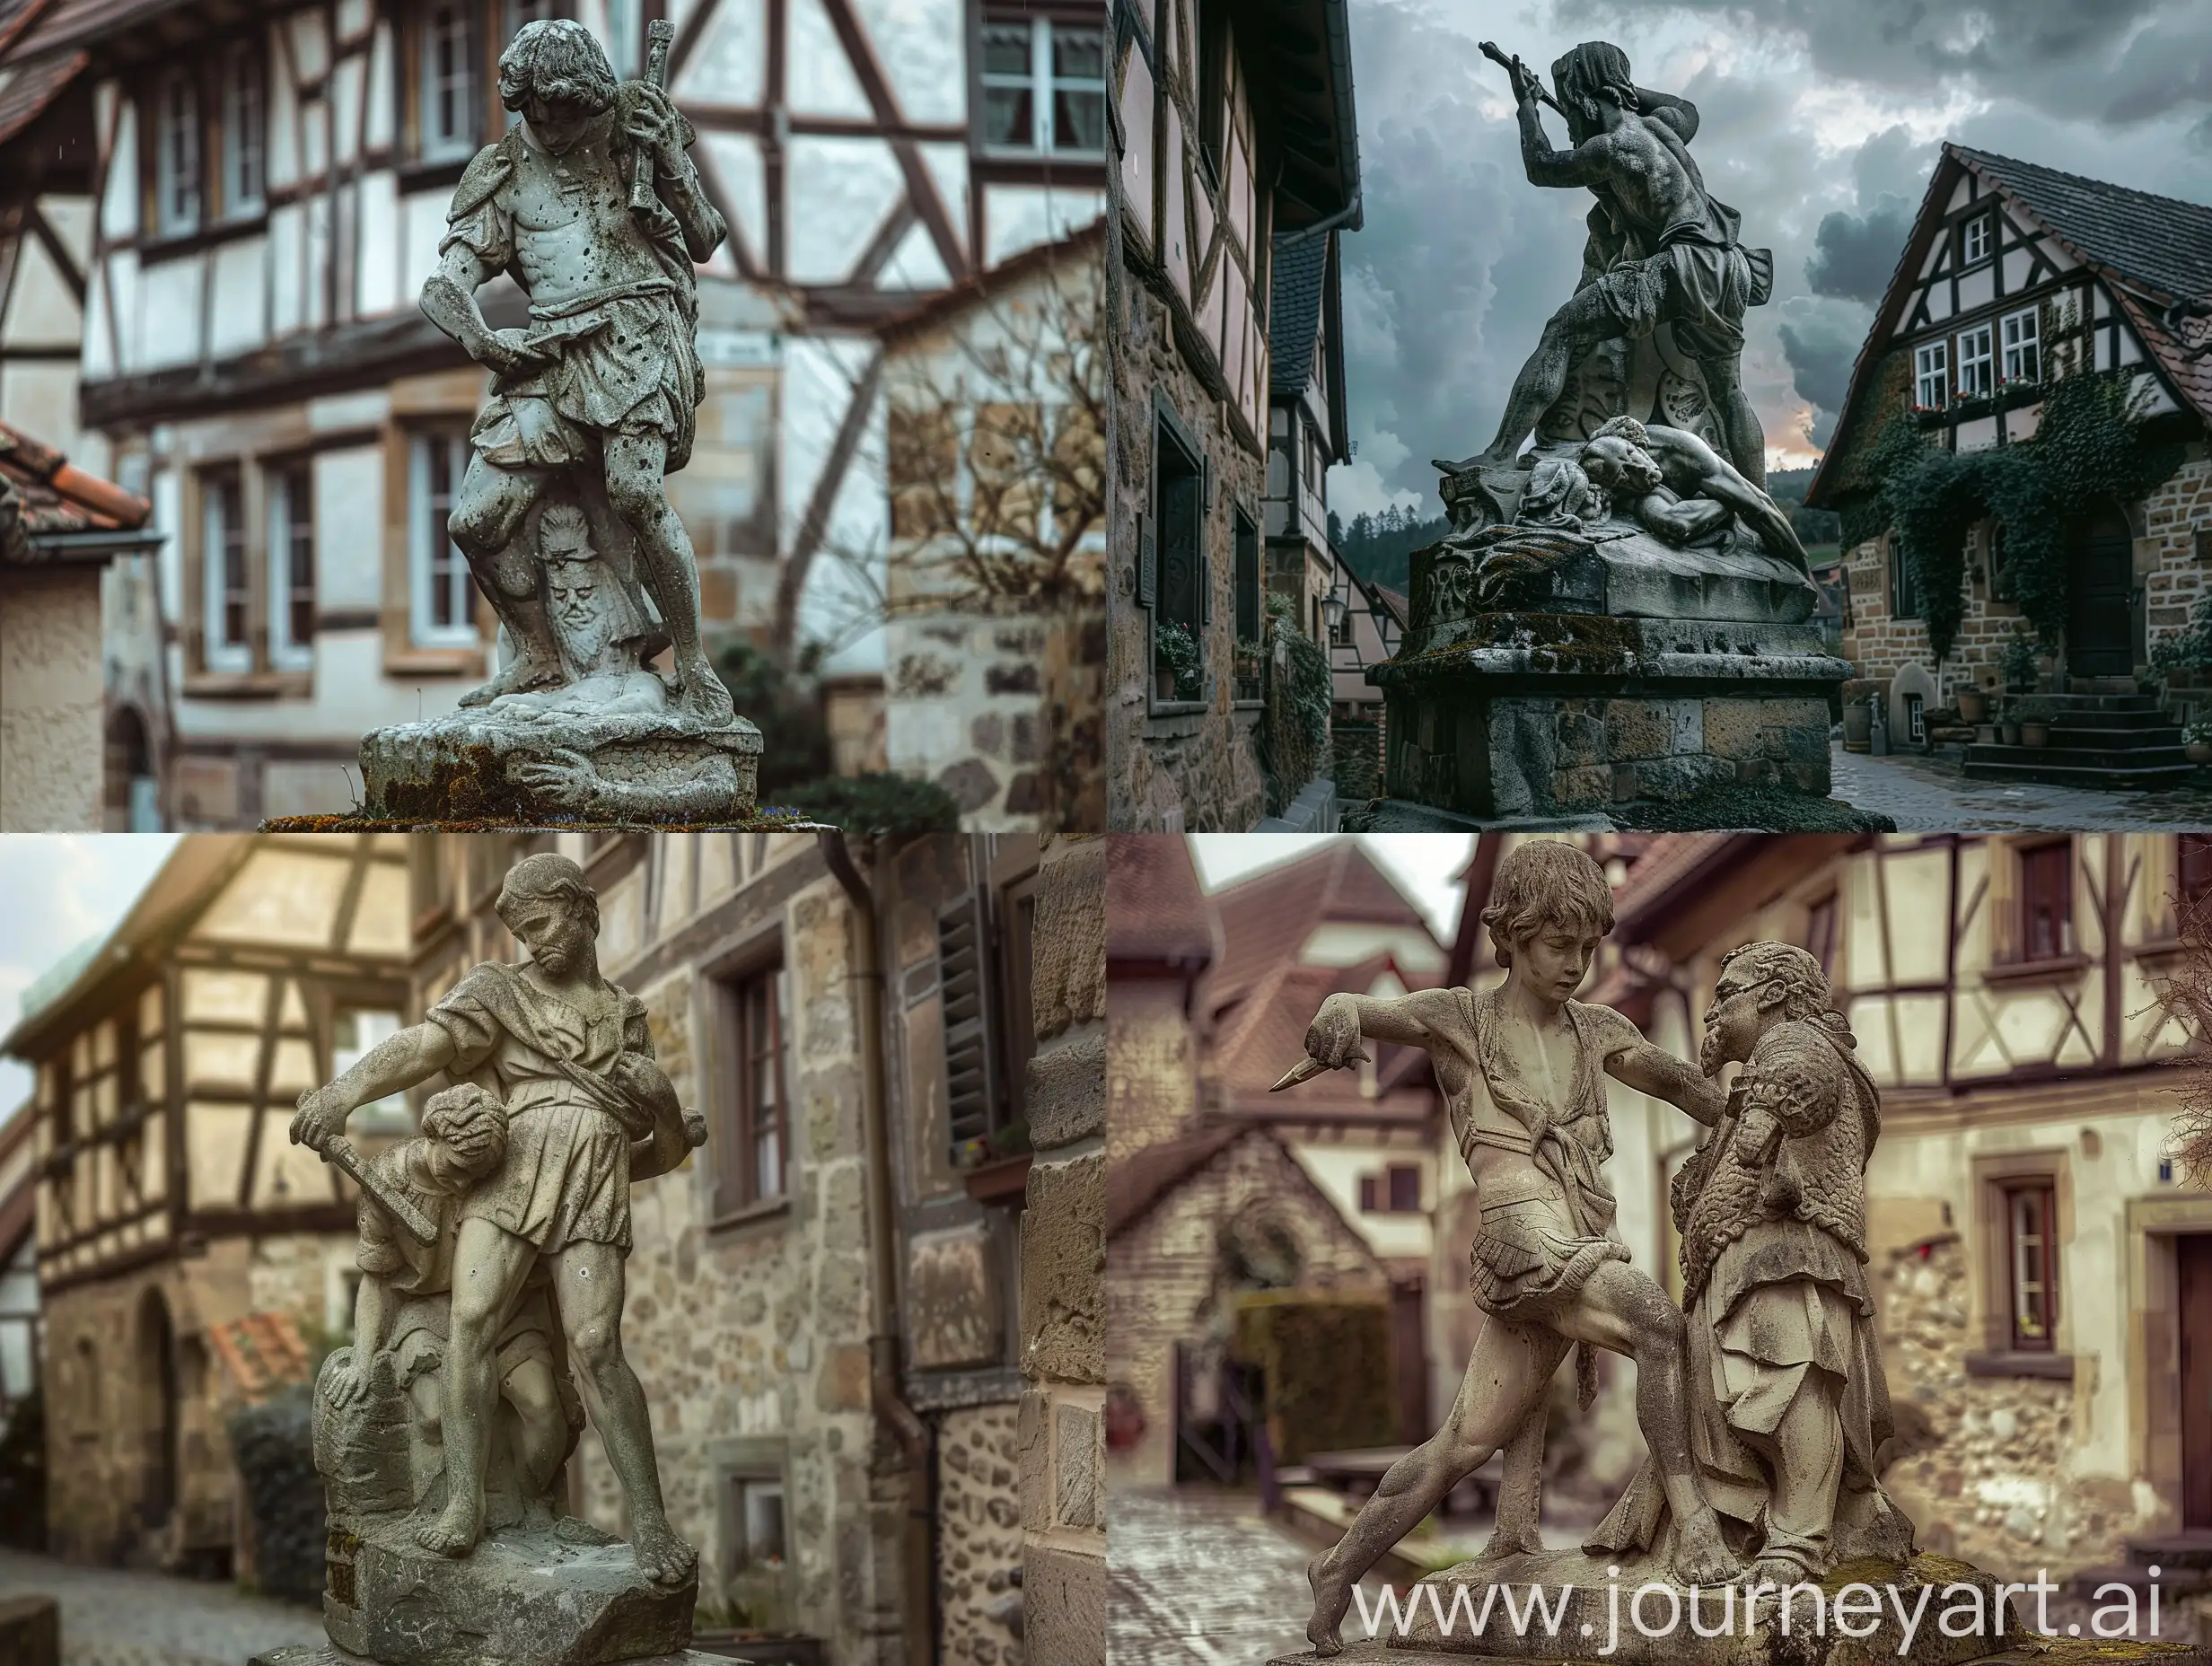 Stone-Statue-of-Young-Man-Murdering-Old-Man-in-Old-German-Village